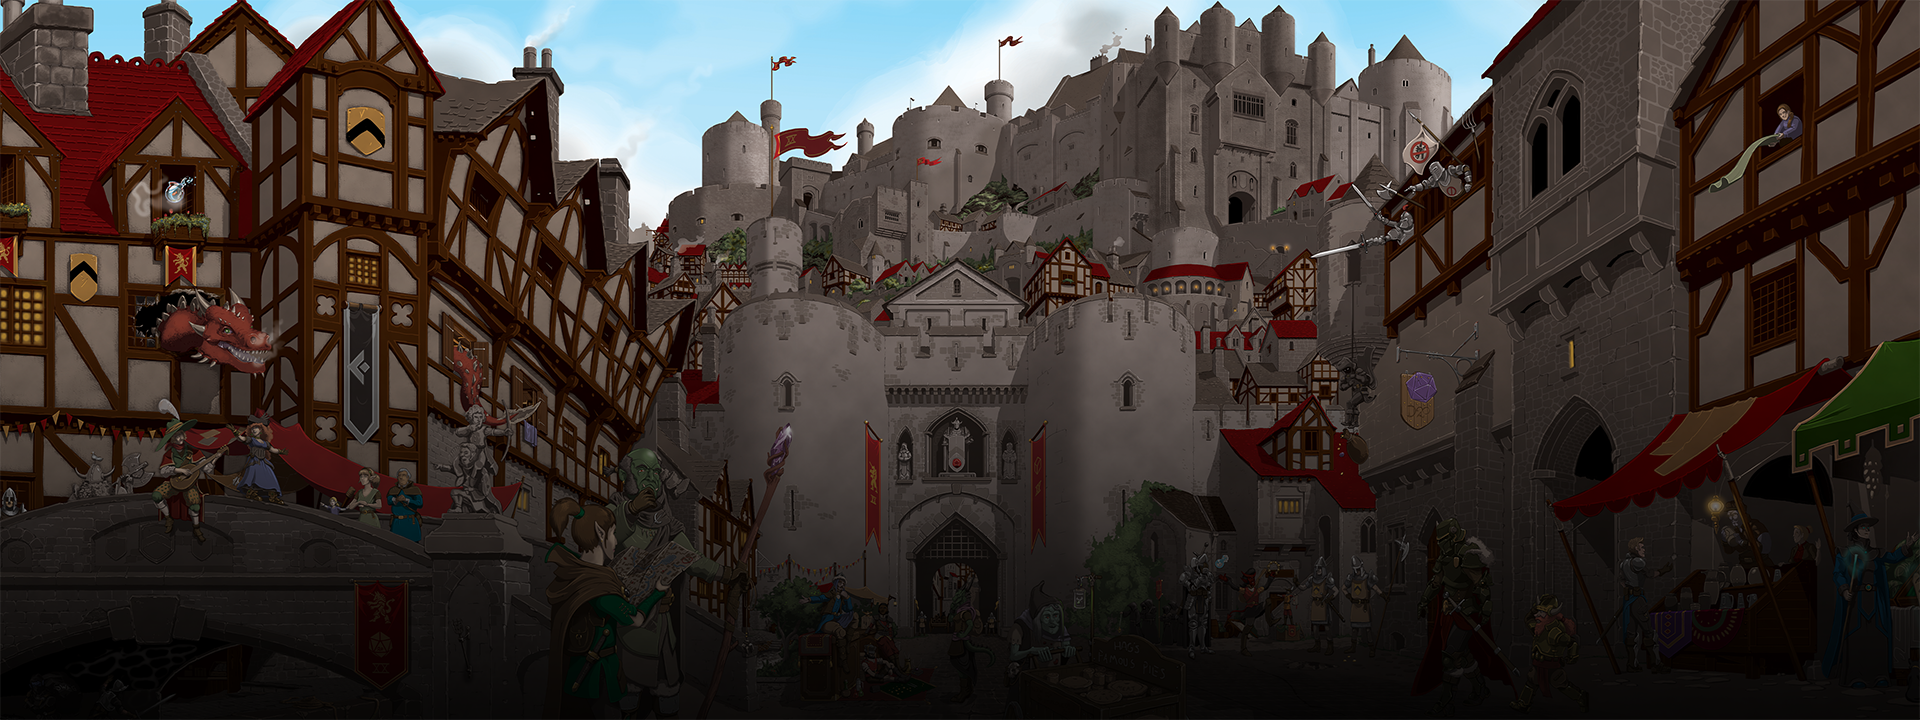 Image. A wide panorama of a bustling medieval city. A bridge cross over to a public square, filled with fantasy adventurers. A castle sits in the background.